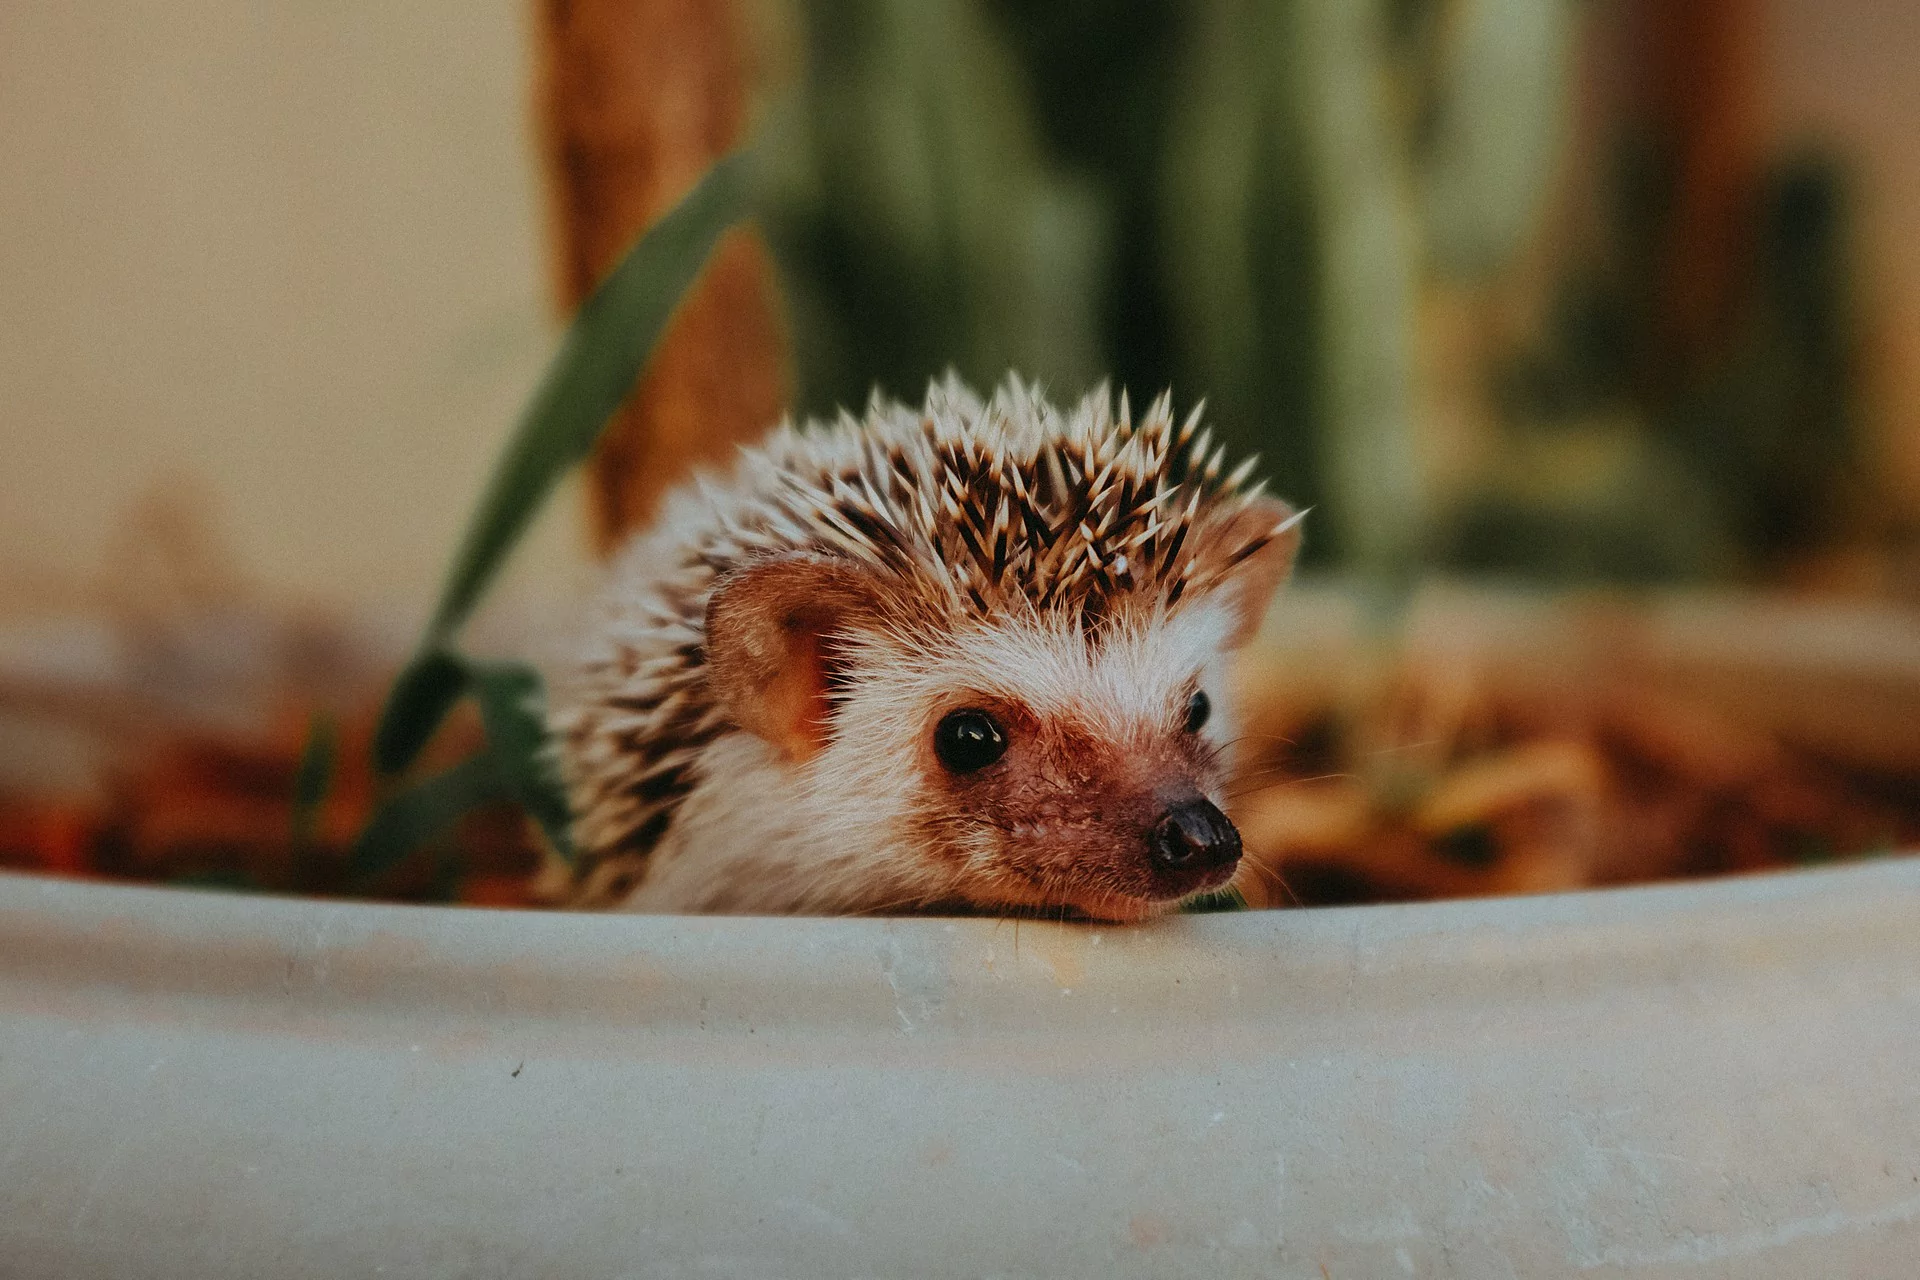 Hibernation is not for all hedgehogs